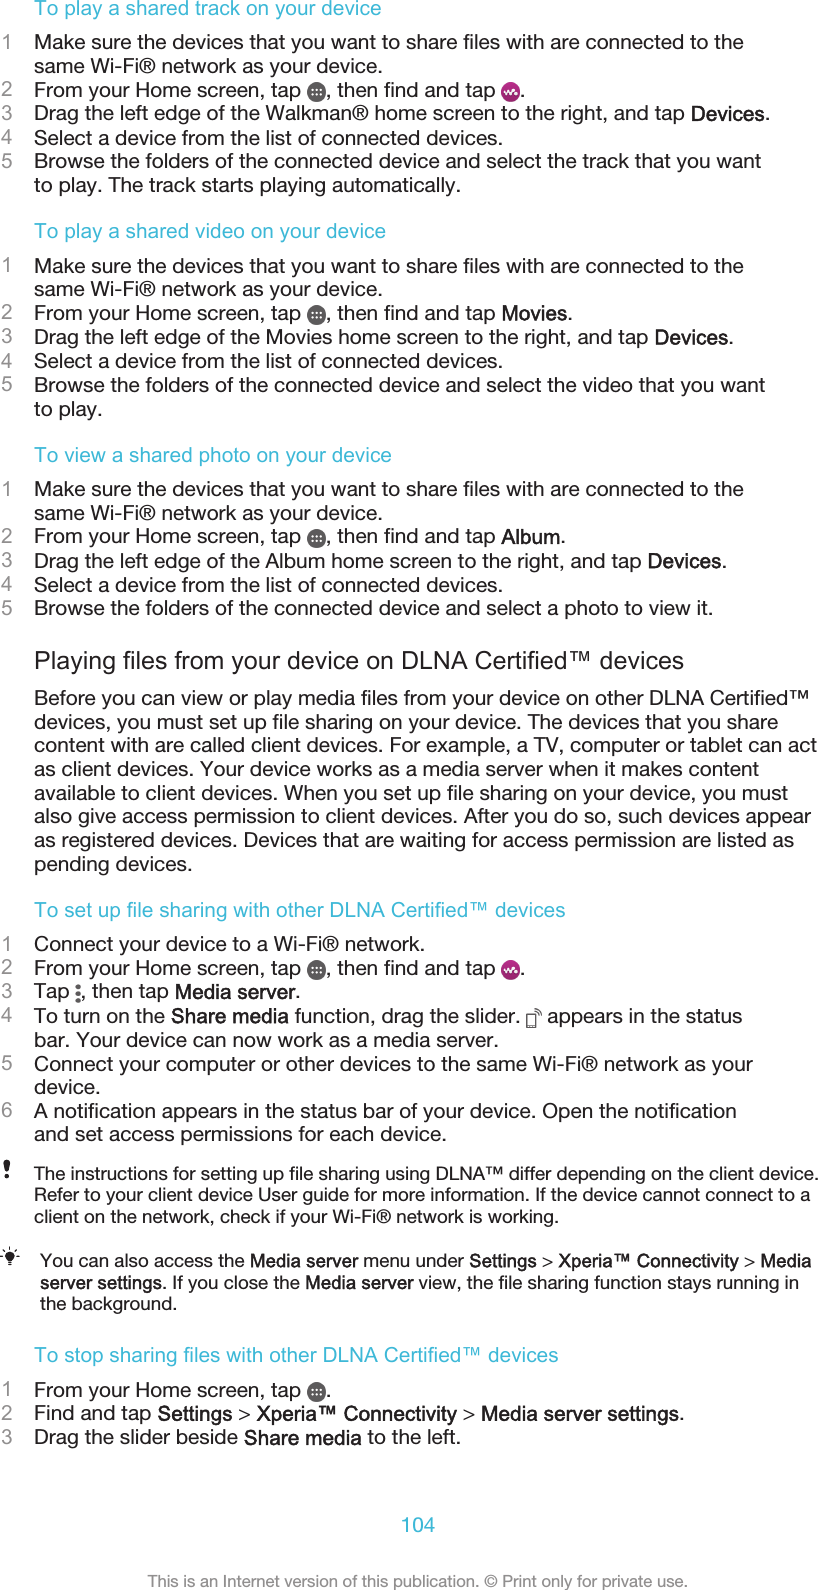 To play a shared track on your device1Make sure the devices that you want to share files with are connected to thesame Wi-Fi® network as your device.2From your Home screen, tap  , then find and tap  .3Drag the left edge of the Walkman® home screen to the right, and tap Devices.4Select a device from the list of connected devices.5Browse the folders of the connected device and select the track that you wantto play. The track starts playing automatically.To play a shared video on your device1Make sure the devices that you want to share files with are connected to thesame Wi-Fi® network as your device.2From your Home screen, tap  , then find and tap Movies.3Drag the left edge of the Movies home screen to the right, and tap Devices.4Select a device from the list of connected devices.5Browse the folders of the connected device and select the video that you wantto play.To view a shared photo on your device1Make sure the devices that you want to share files with are connected to thesame Wi-Fi® network as your device.2From your Home screen, tap  , then find and tap Album.3Drag the left edge of the Album home screen to the right, and tap Devices.4Select a device from the list of connected devices.5Browse the folders of the connected device and select a photo to view it.Playing files from your device on DLNA Certified™ devicesBefore you can view or play media files from your device on other DLNA Certified™devices, you must set up file sharing on your device. The devices that you sharecontent with are called client devices. For example, a TV, computer or tablet can actas client devices. Your device works as a media server when it makes contentavailable to client devices. When you set up file sharing on your device, you mustalso give access permission to client devices. After you do so, such devices appearas registered devices. Devices that are waiting for access permission are listed aspending devices.To set up file sharing with other DLNA Certified™ devices1Connect your device to a Wi-Fi® network.2From your Home screen, tap  , then find and tap  .3Tap  , then tap Media server.4To turn on the Share media function, drag the slider.   appears in the statusbar. Your device can now work as a media server.5Connect your computer or other devices to the same Wi-Fi® network as yourdevice.6A notification appears in the status bar of your device. Open the notificationand set access permissions for each device.The instructions for setting up file sharing using DLNA™ differ depending on the client device.Refer to your client device User guide for more information. If the device cannot connect to aclient on the network, check if your Wi-Fi® network is working.You can also access the Media server menu under Settings &gt; Xperia™ Connectivity &gt; Mediaserver settings. If you close the Media server view, the file sharing function stays running inthe background.To stop sharing files with other DLNA Certified™ devices1From your Home screen, tap  .2Find and tap Settings &gt; Xperia™ Connectivity &gt; Media server settings.3Drag the slider beside Share media to the left.104This is an Internet version of this publication. © Print only for private use.